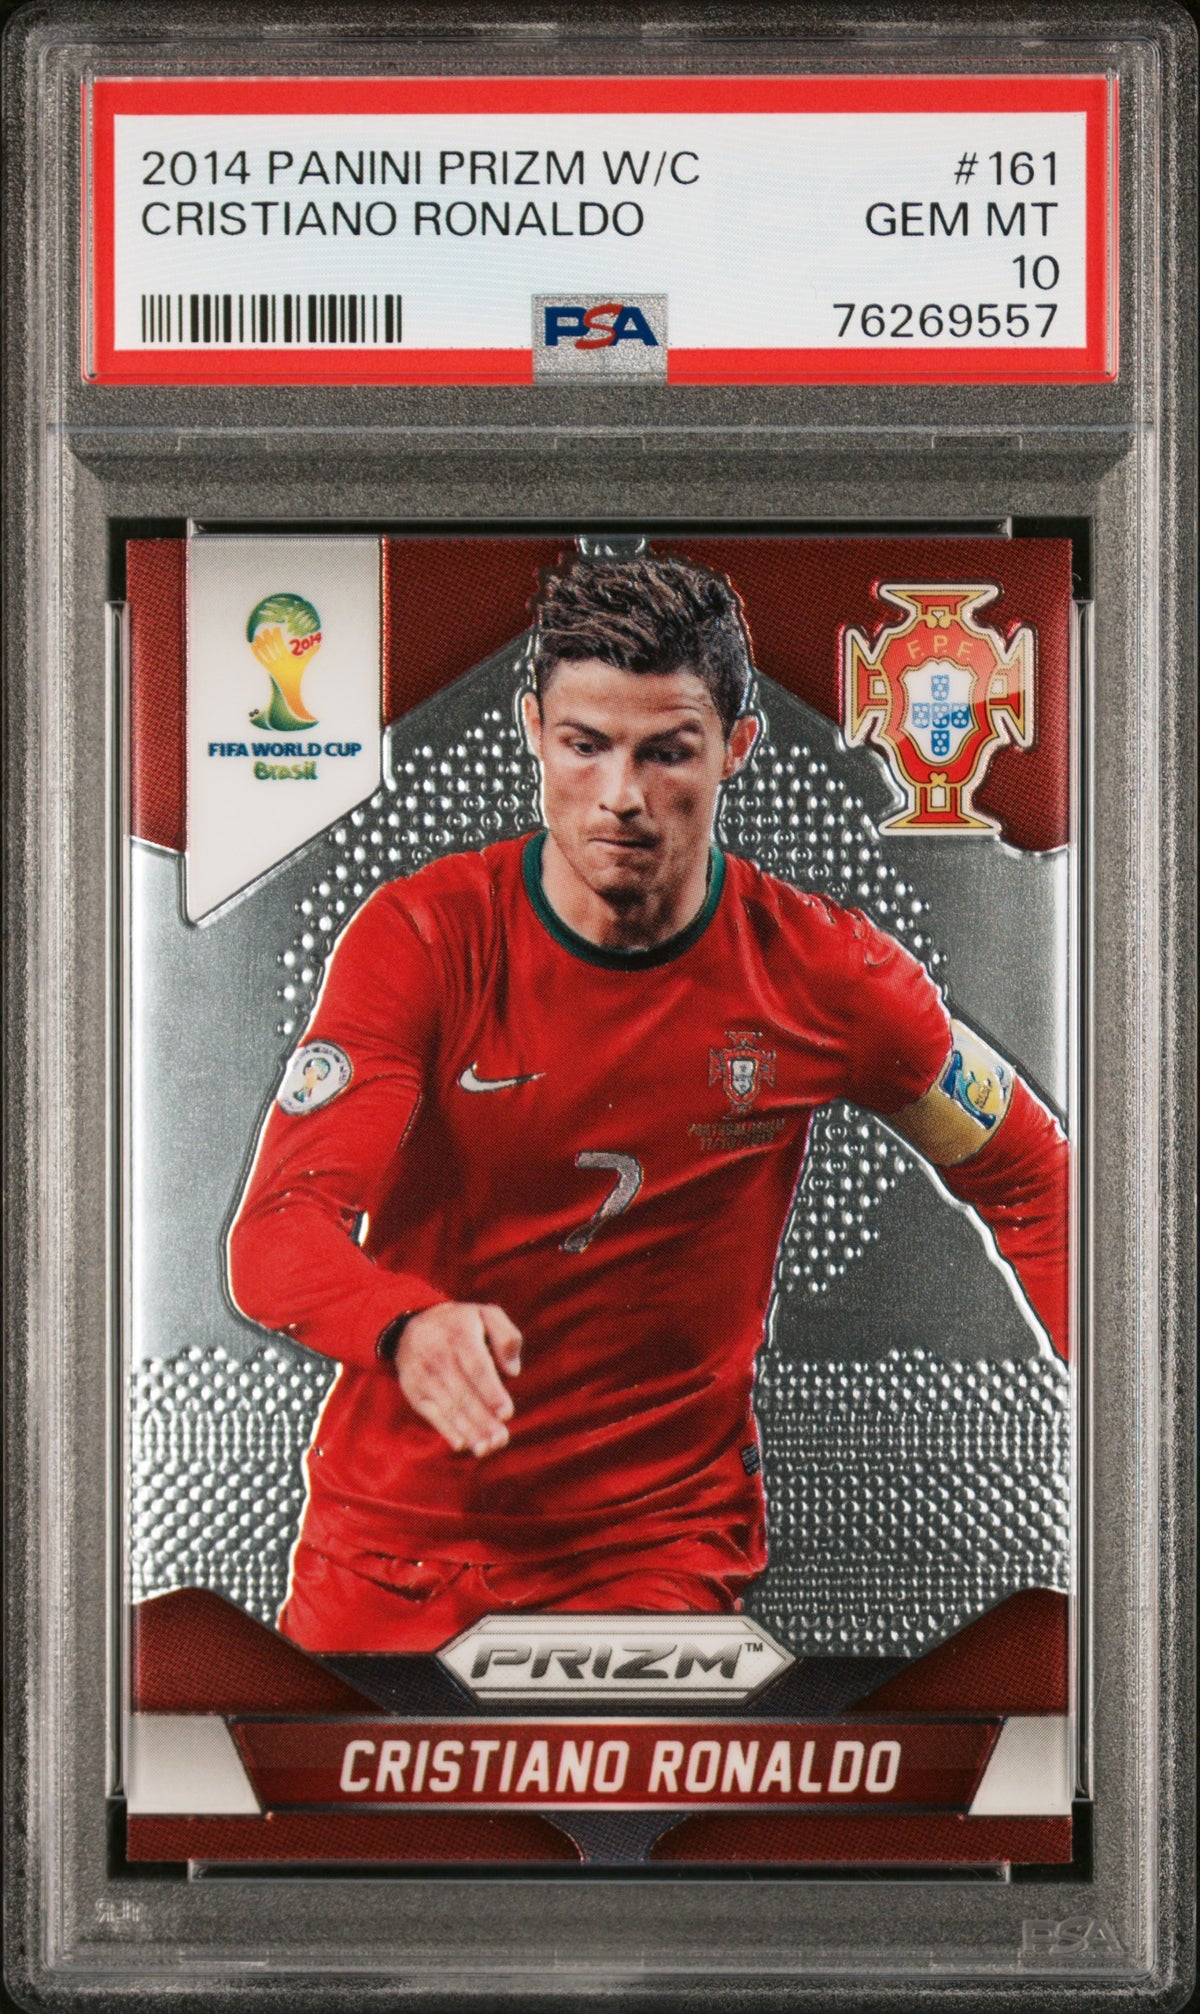 2022 Panini Instant FIFA World Cup Soccer Trading Cards Pick From List